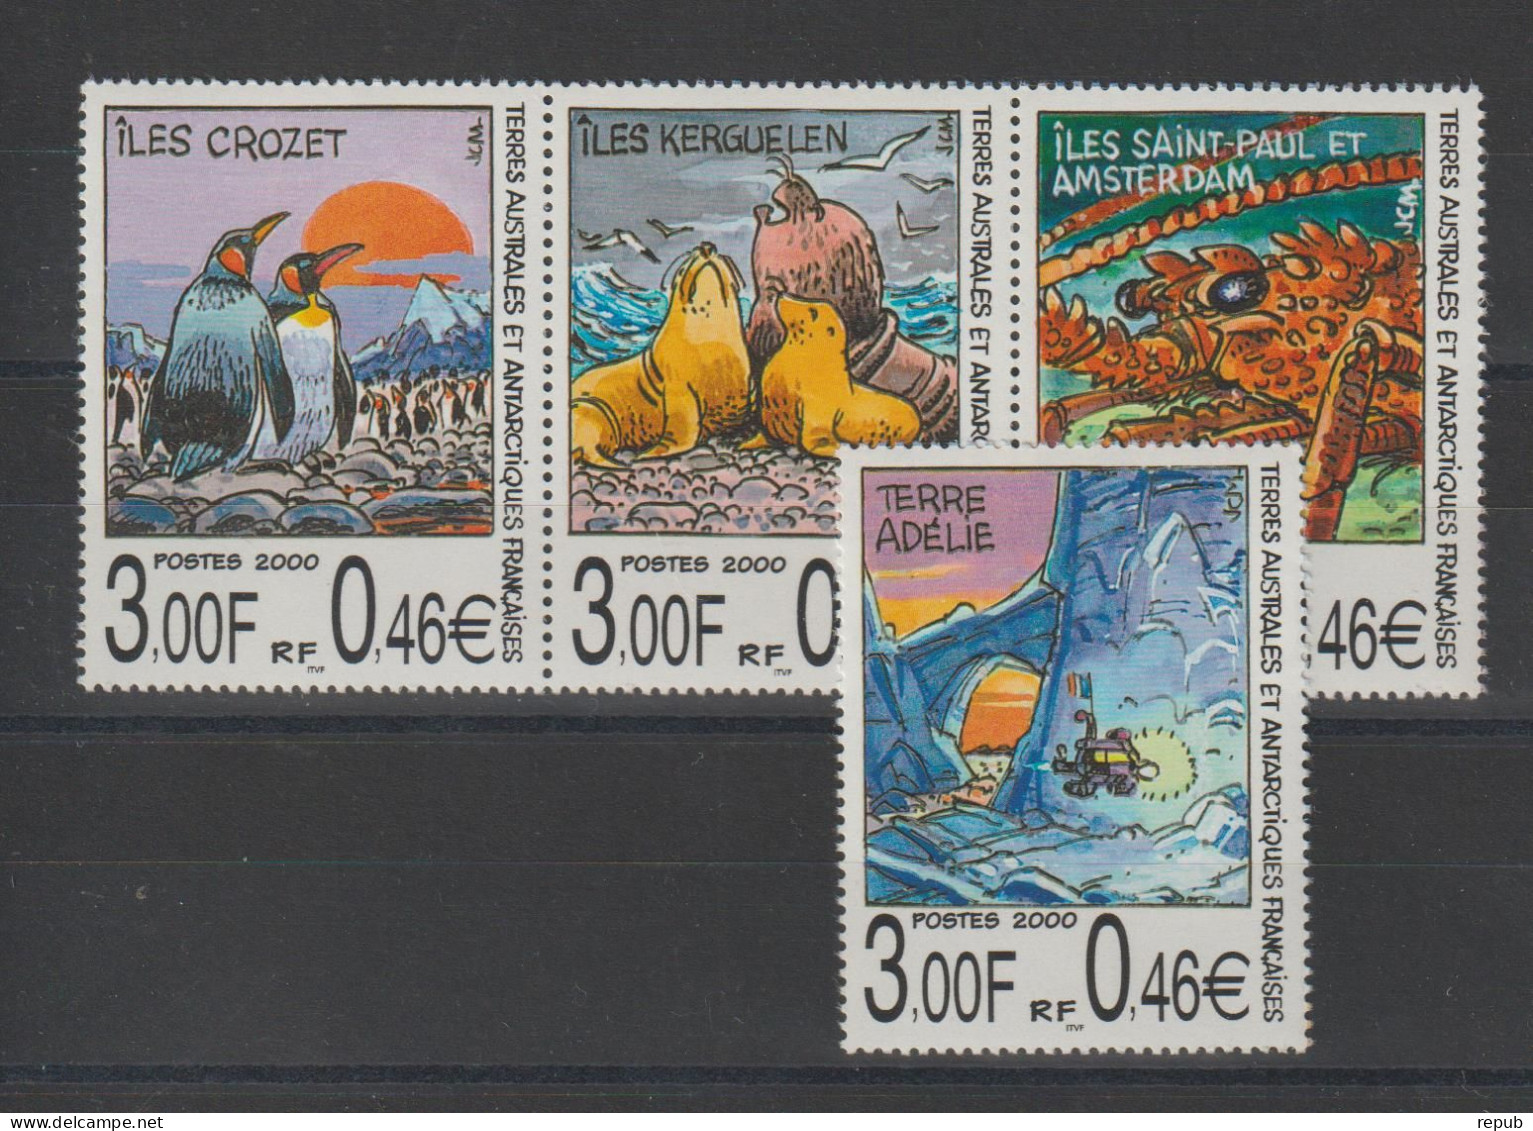 TAAF 2000 Timbres Issus Du BF 4, 281-284, 4 Val ** MNH - Unused Stamps